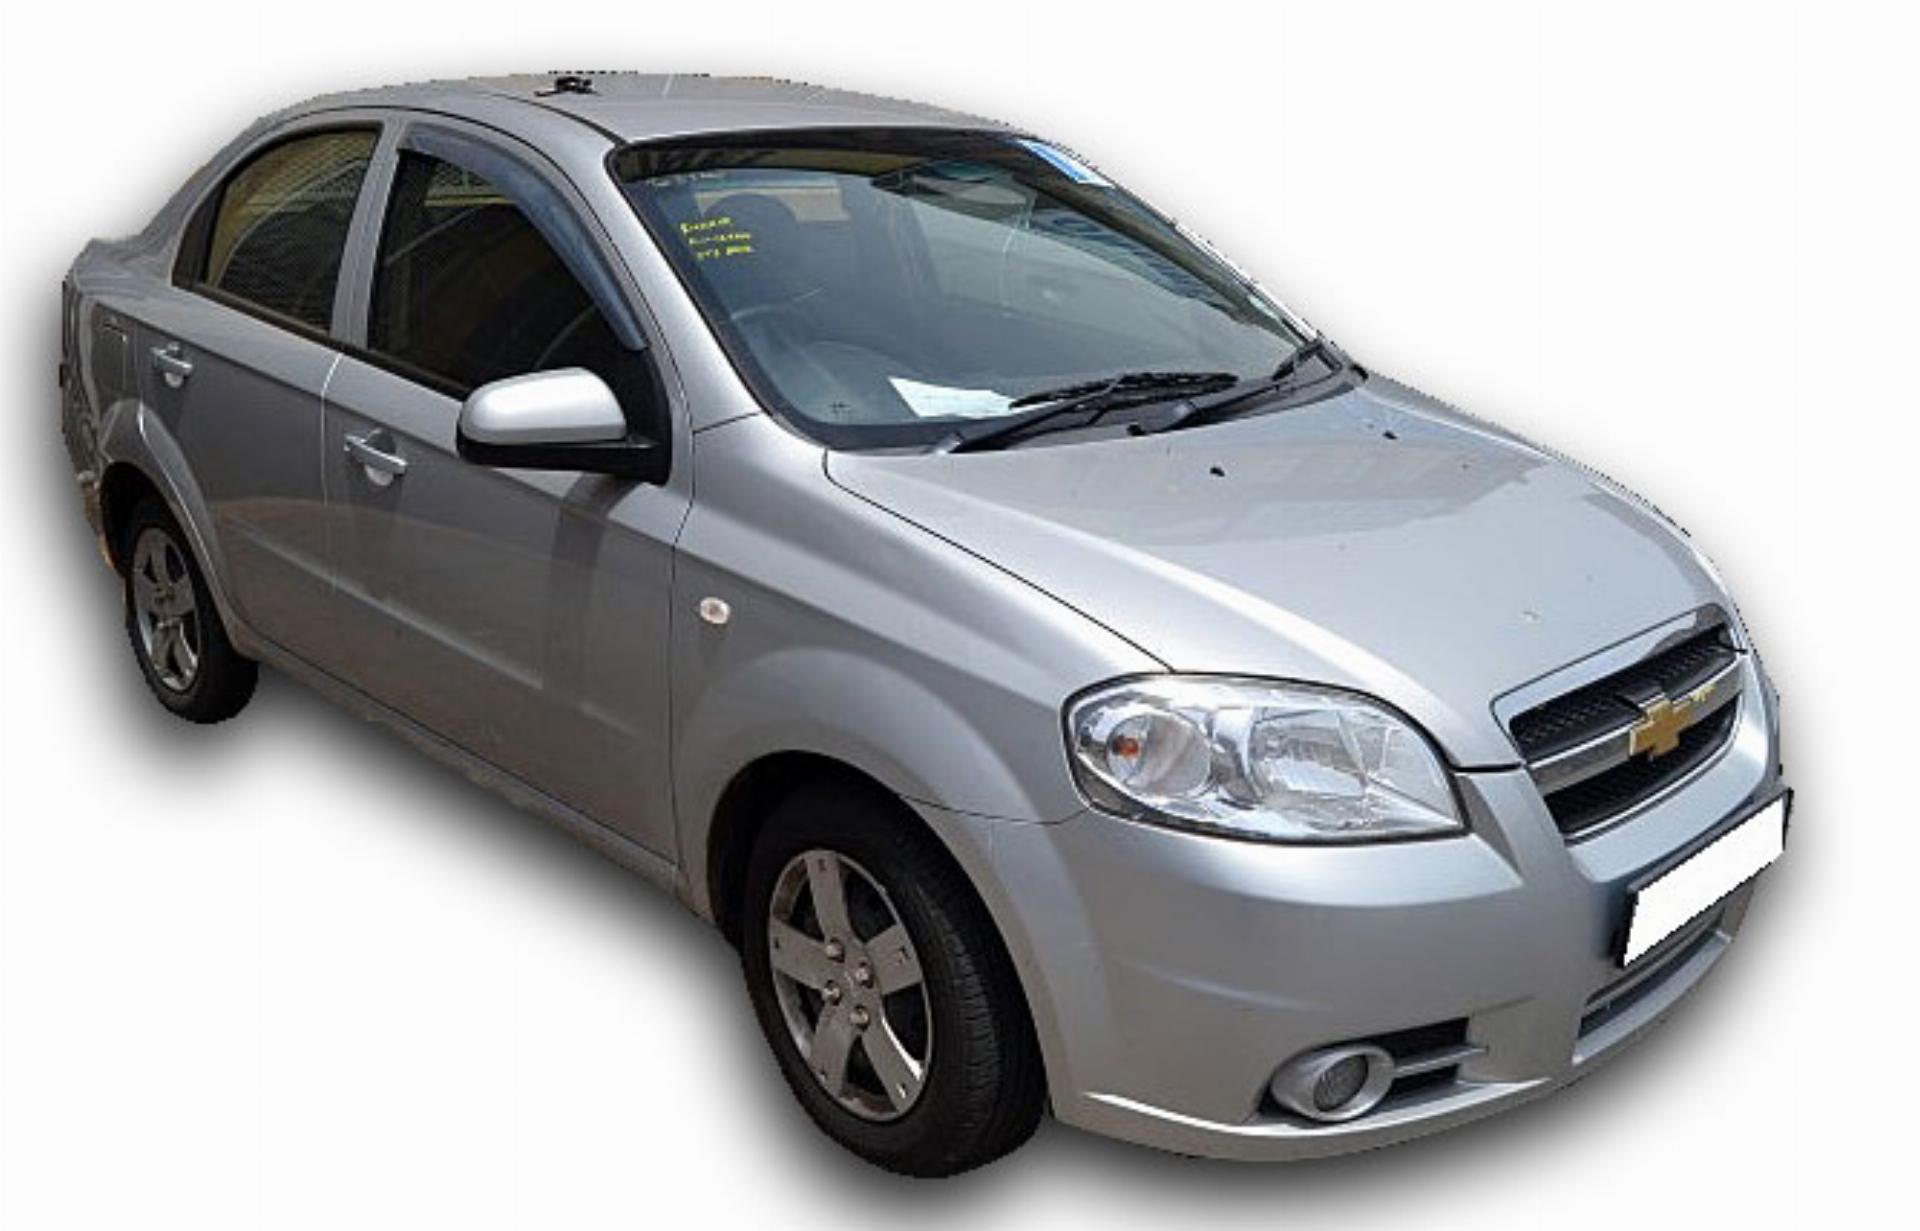 Repossessed Chevrolet Aveo 1.6 LS A/T 2010 on auction